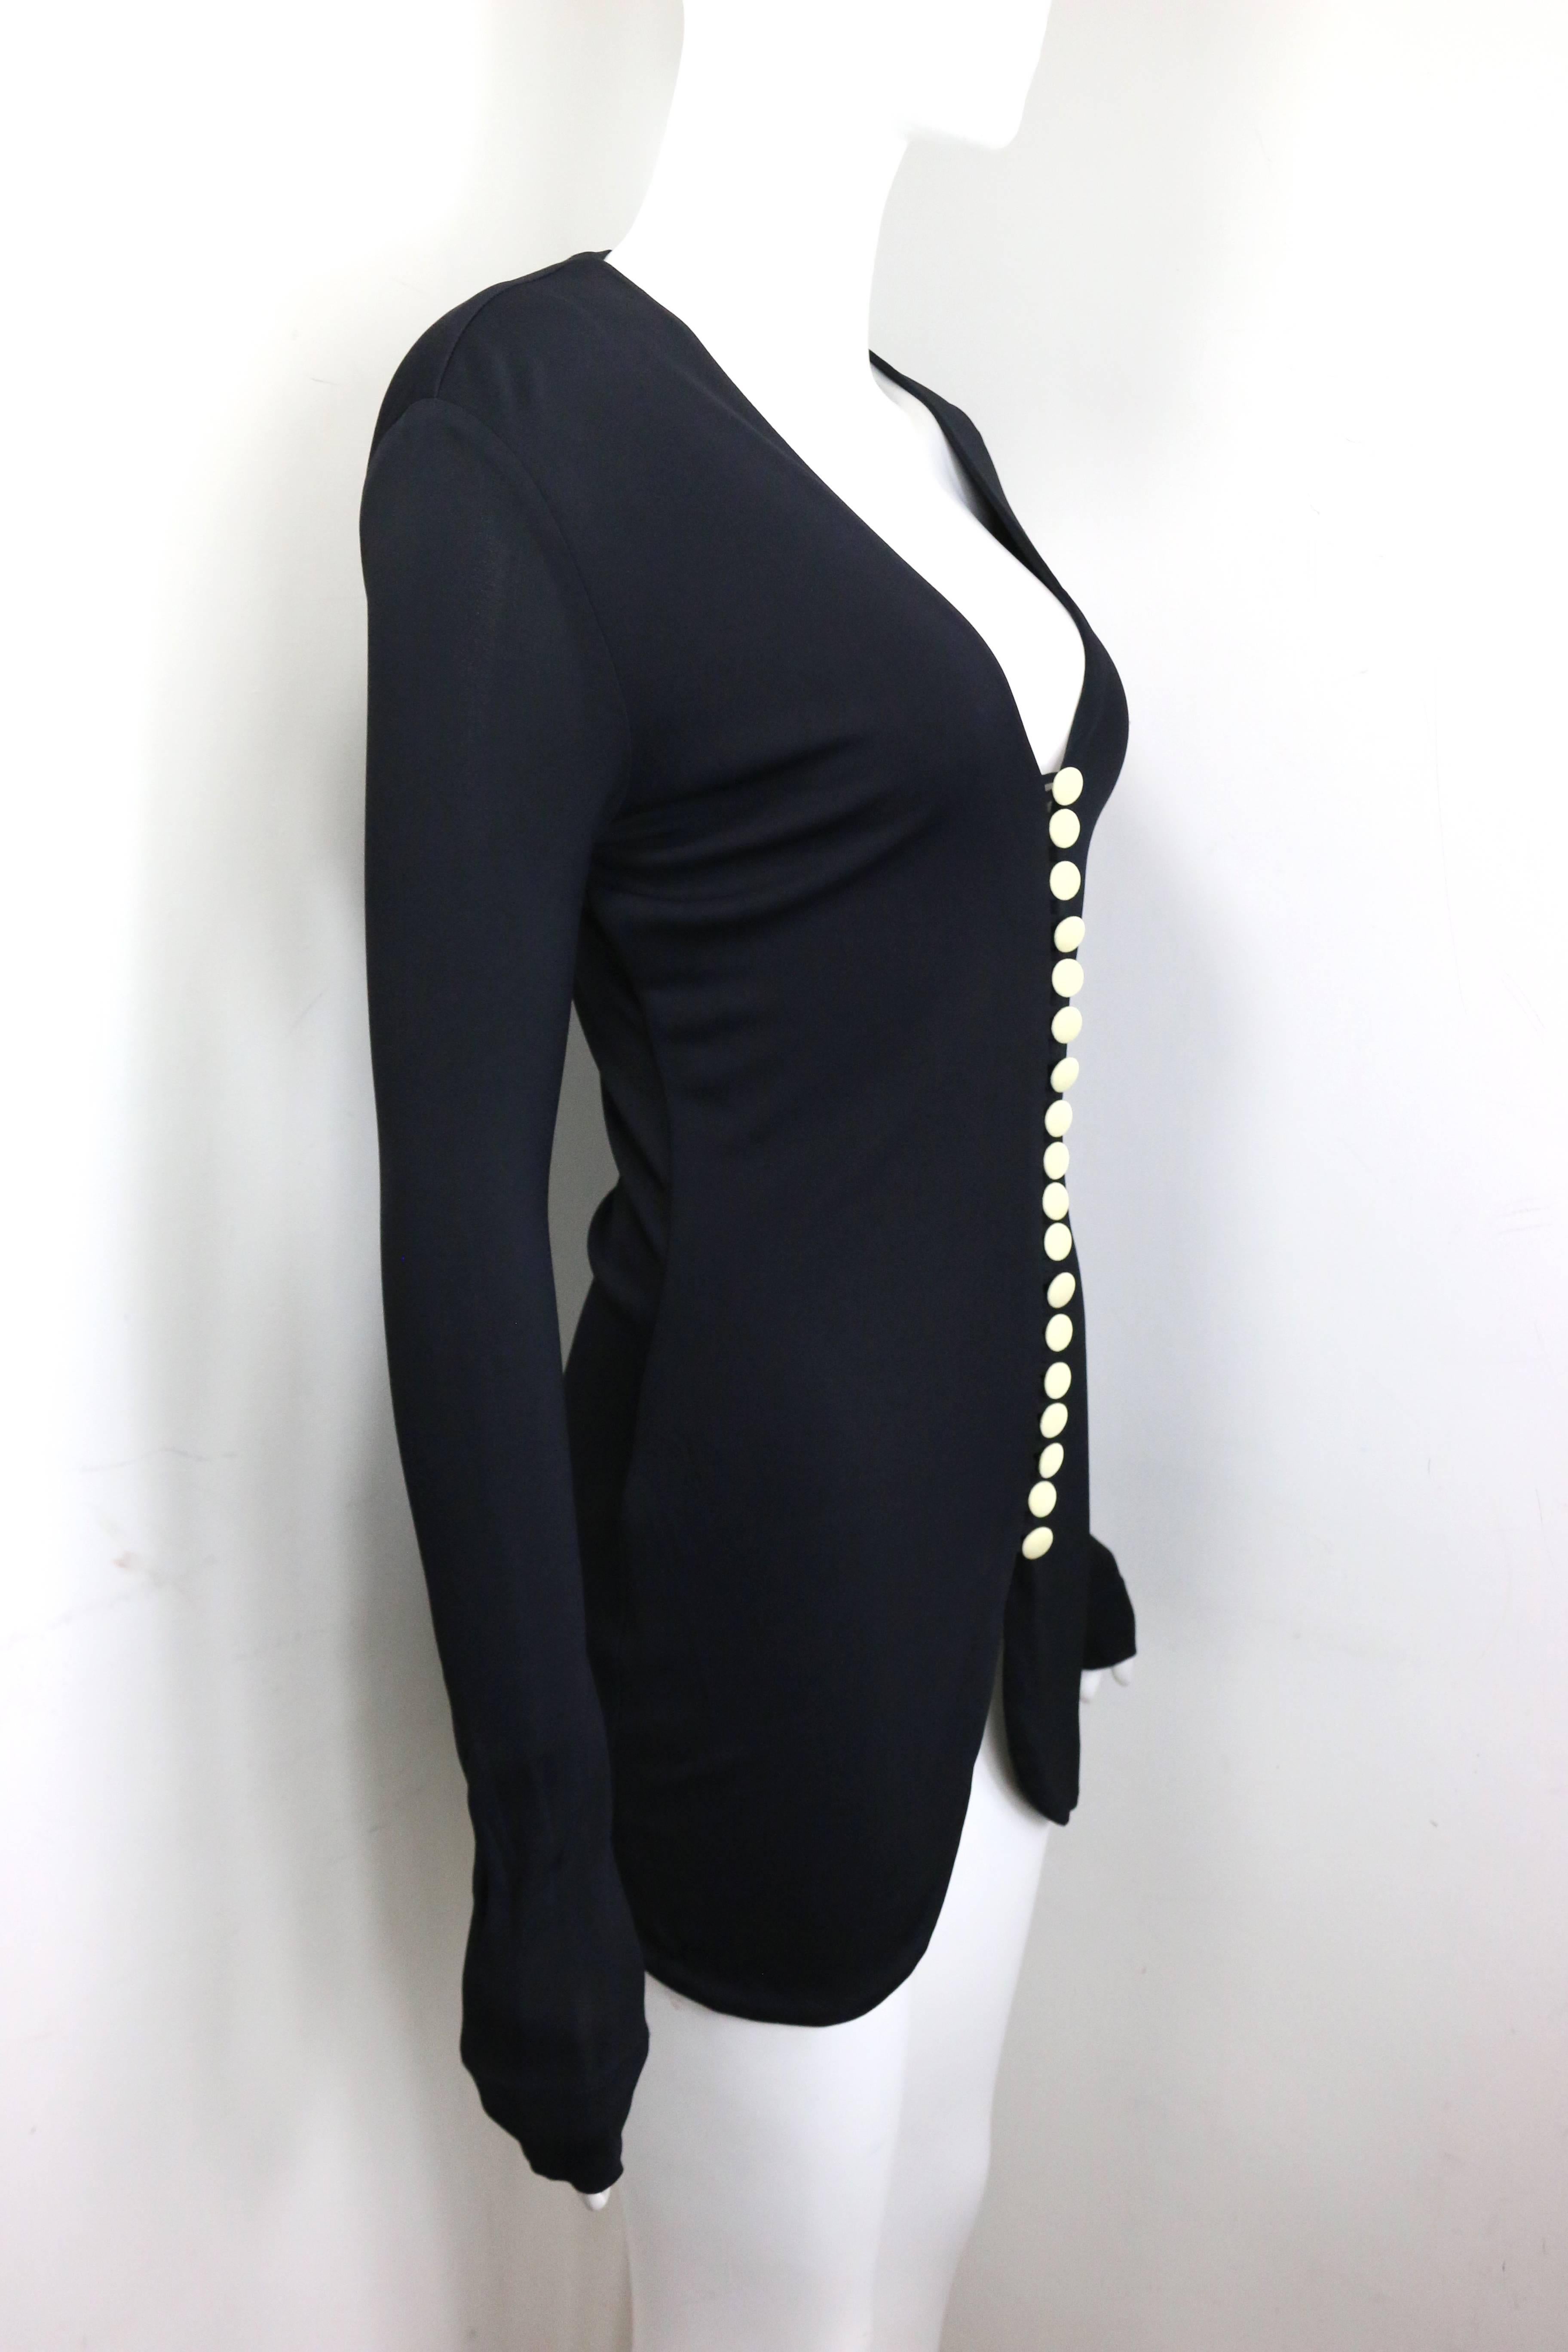 Moschino Couture Black Tunic with Multi White Buttons  In Excellent Condition For Sale In Sheung Wan, HK